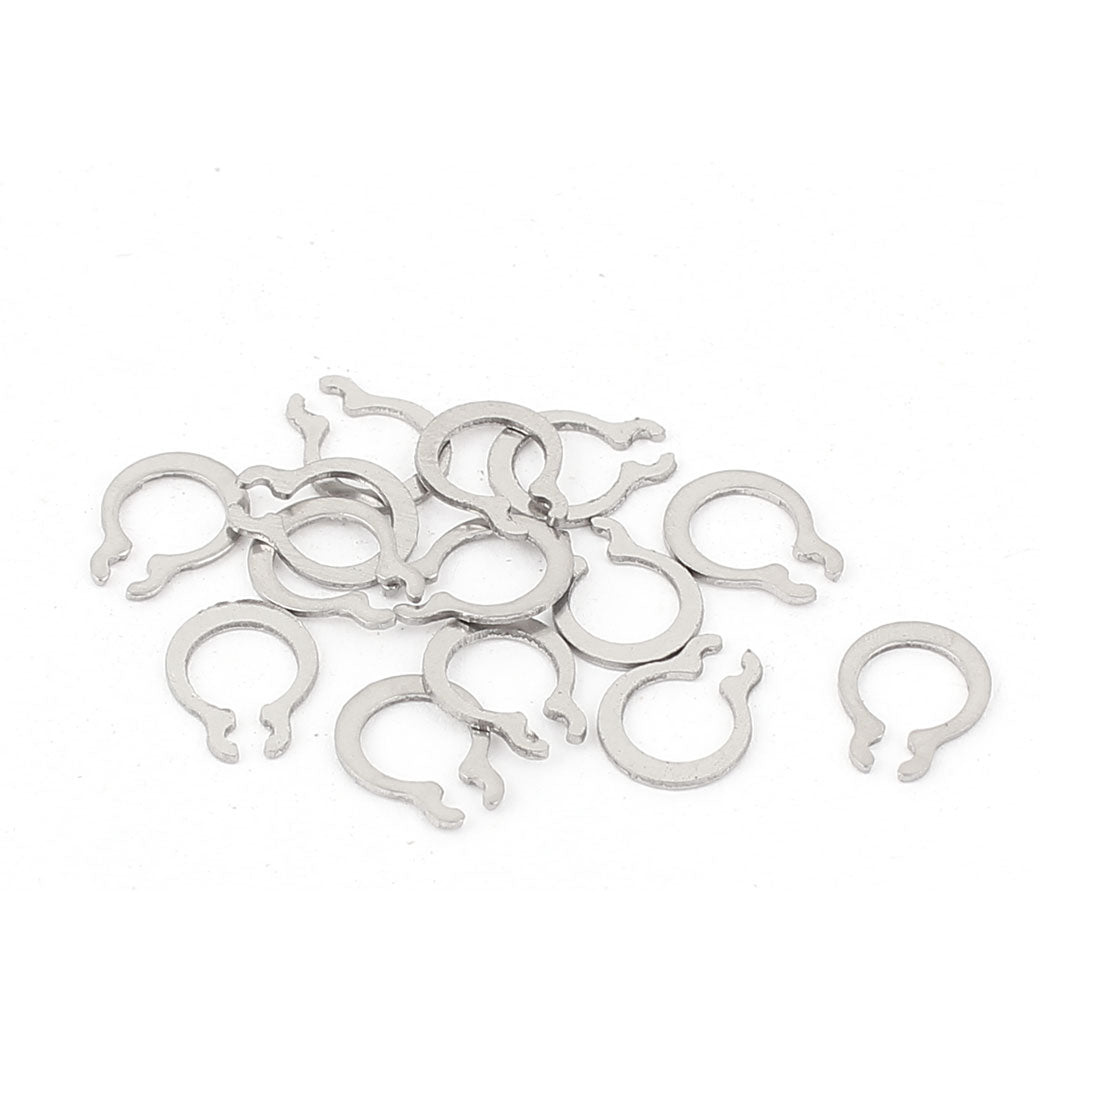 uxcell Uxcell 14pcs Plane Retaining Ring C-Clip for 5mm Rimfire Motor Shafts